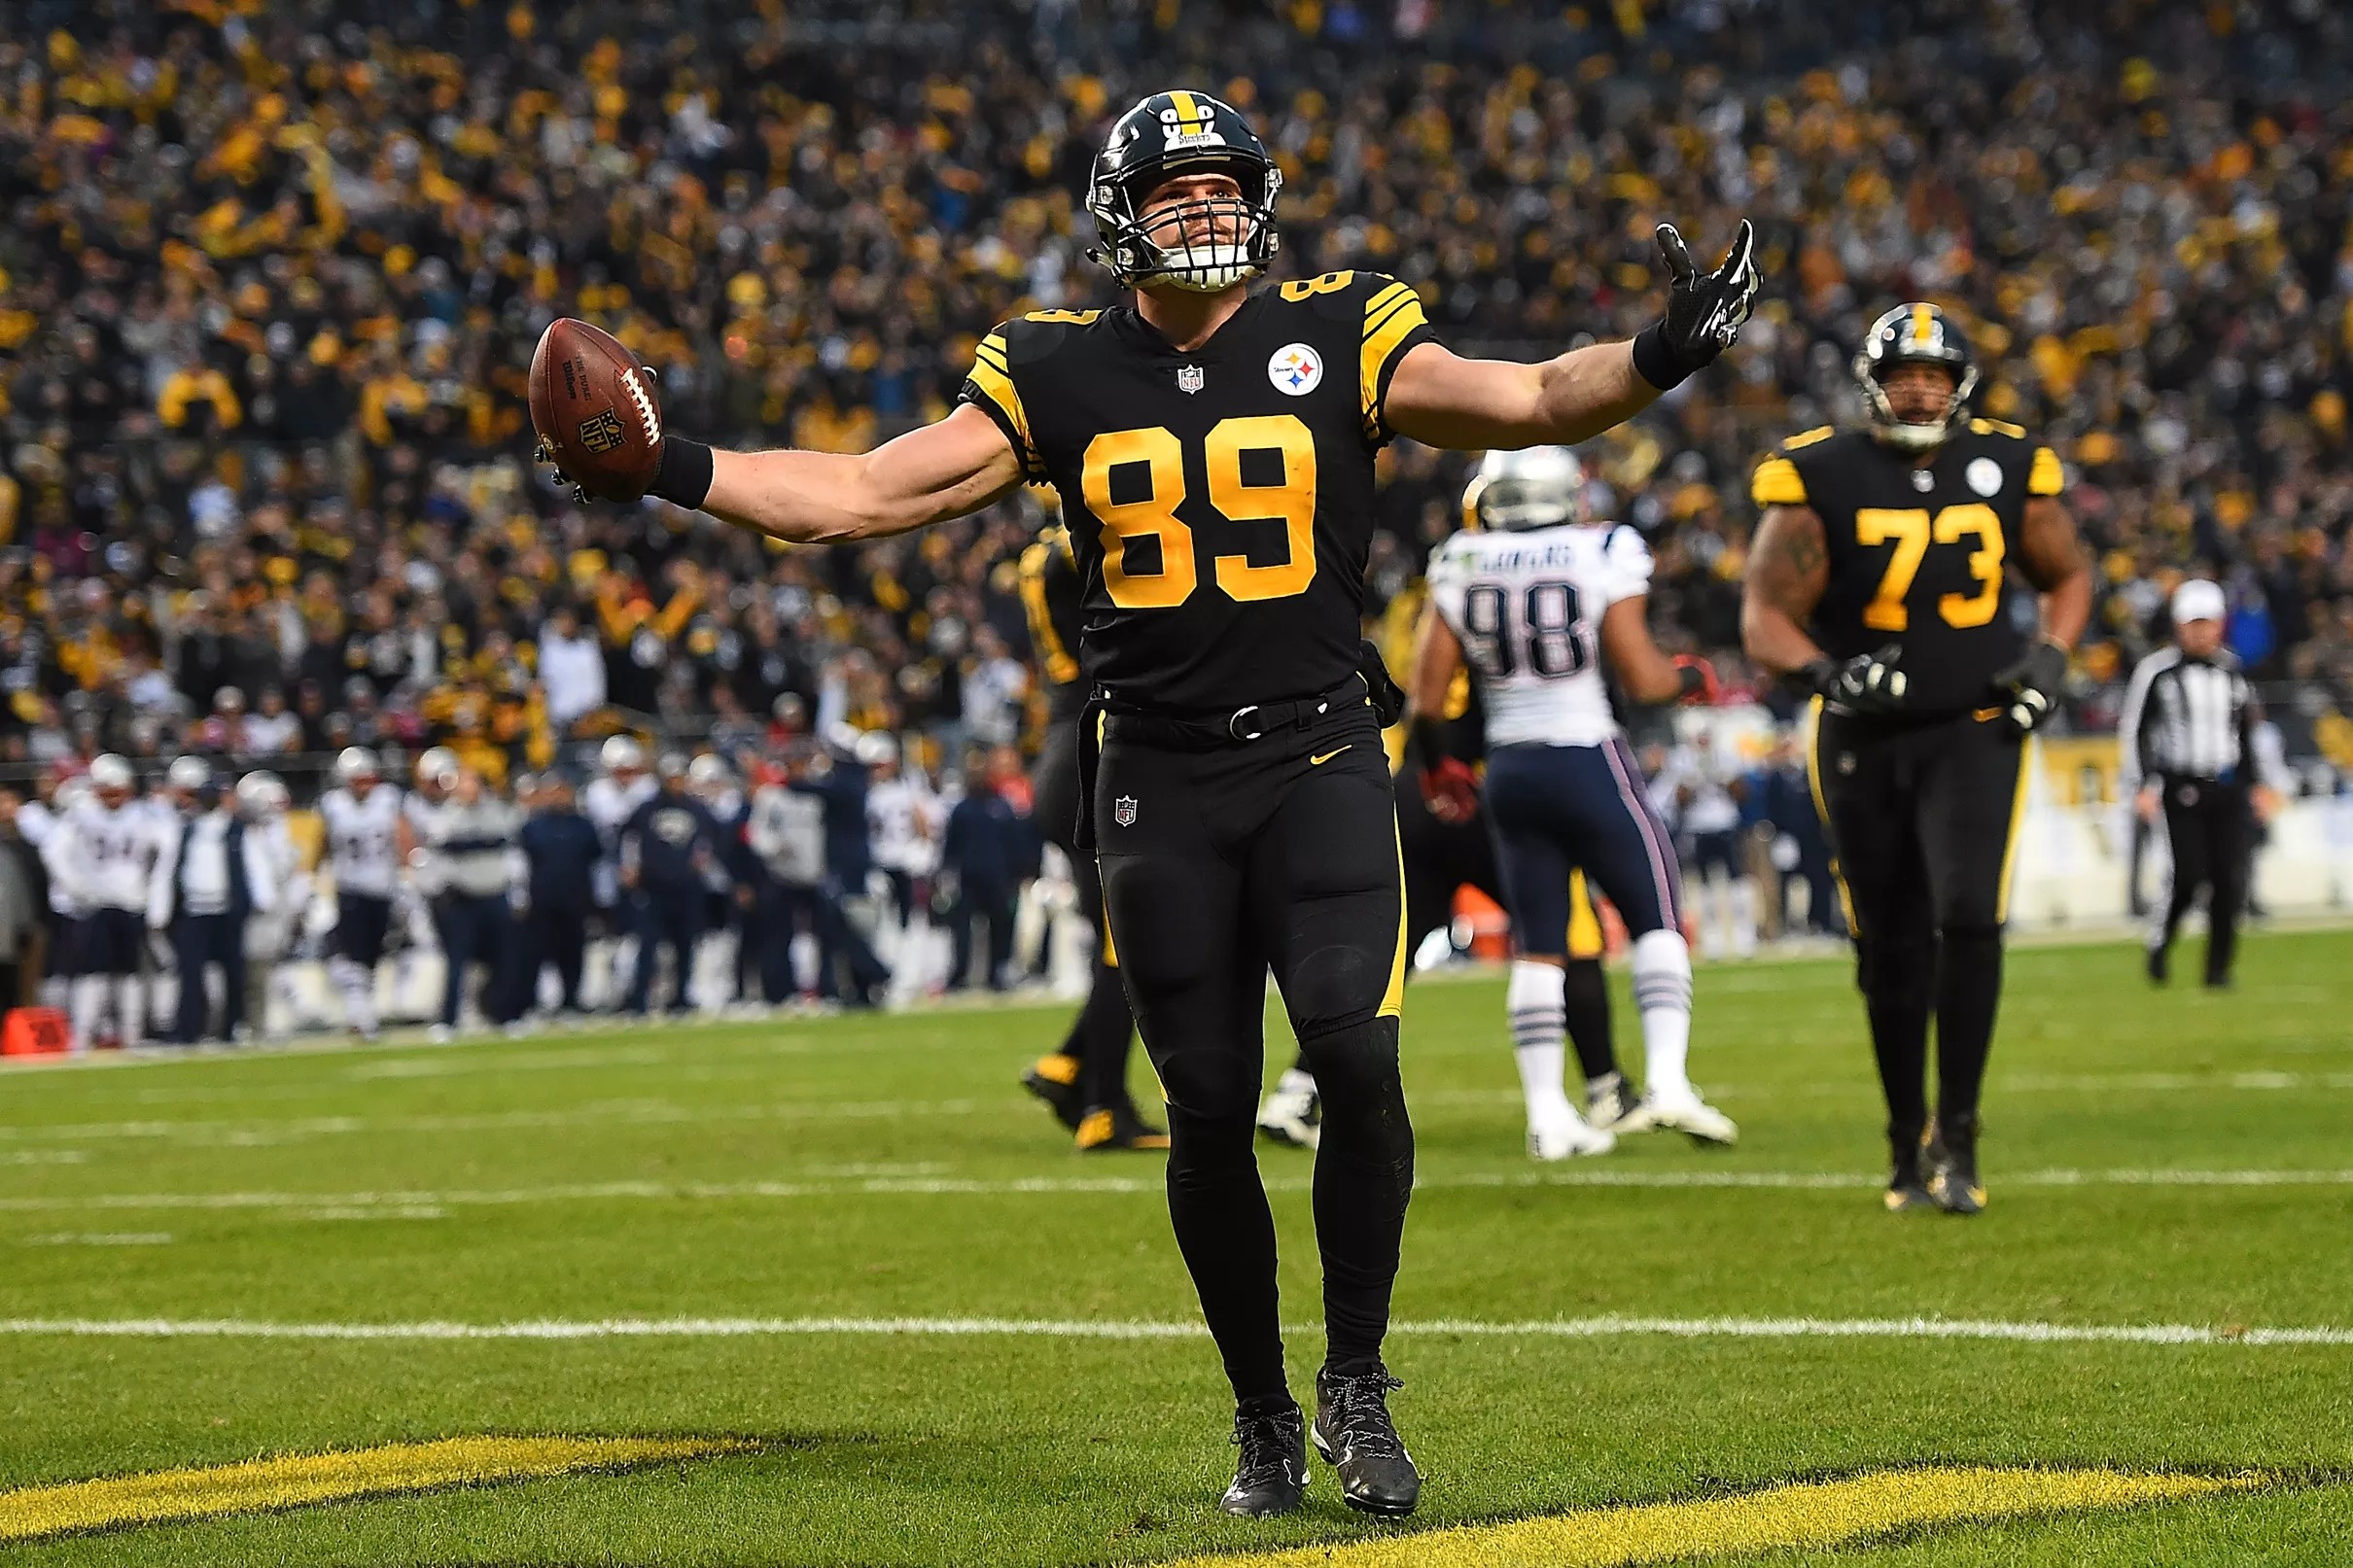 Heading Into 2019 The Pittsburgh Steelers Tight End Depth Is Just Scary